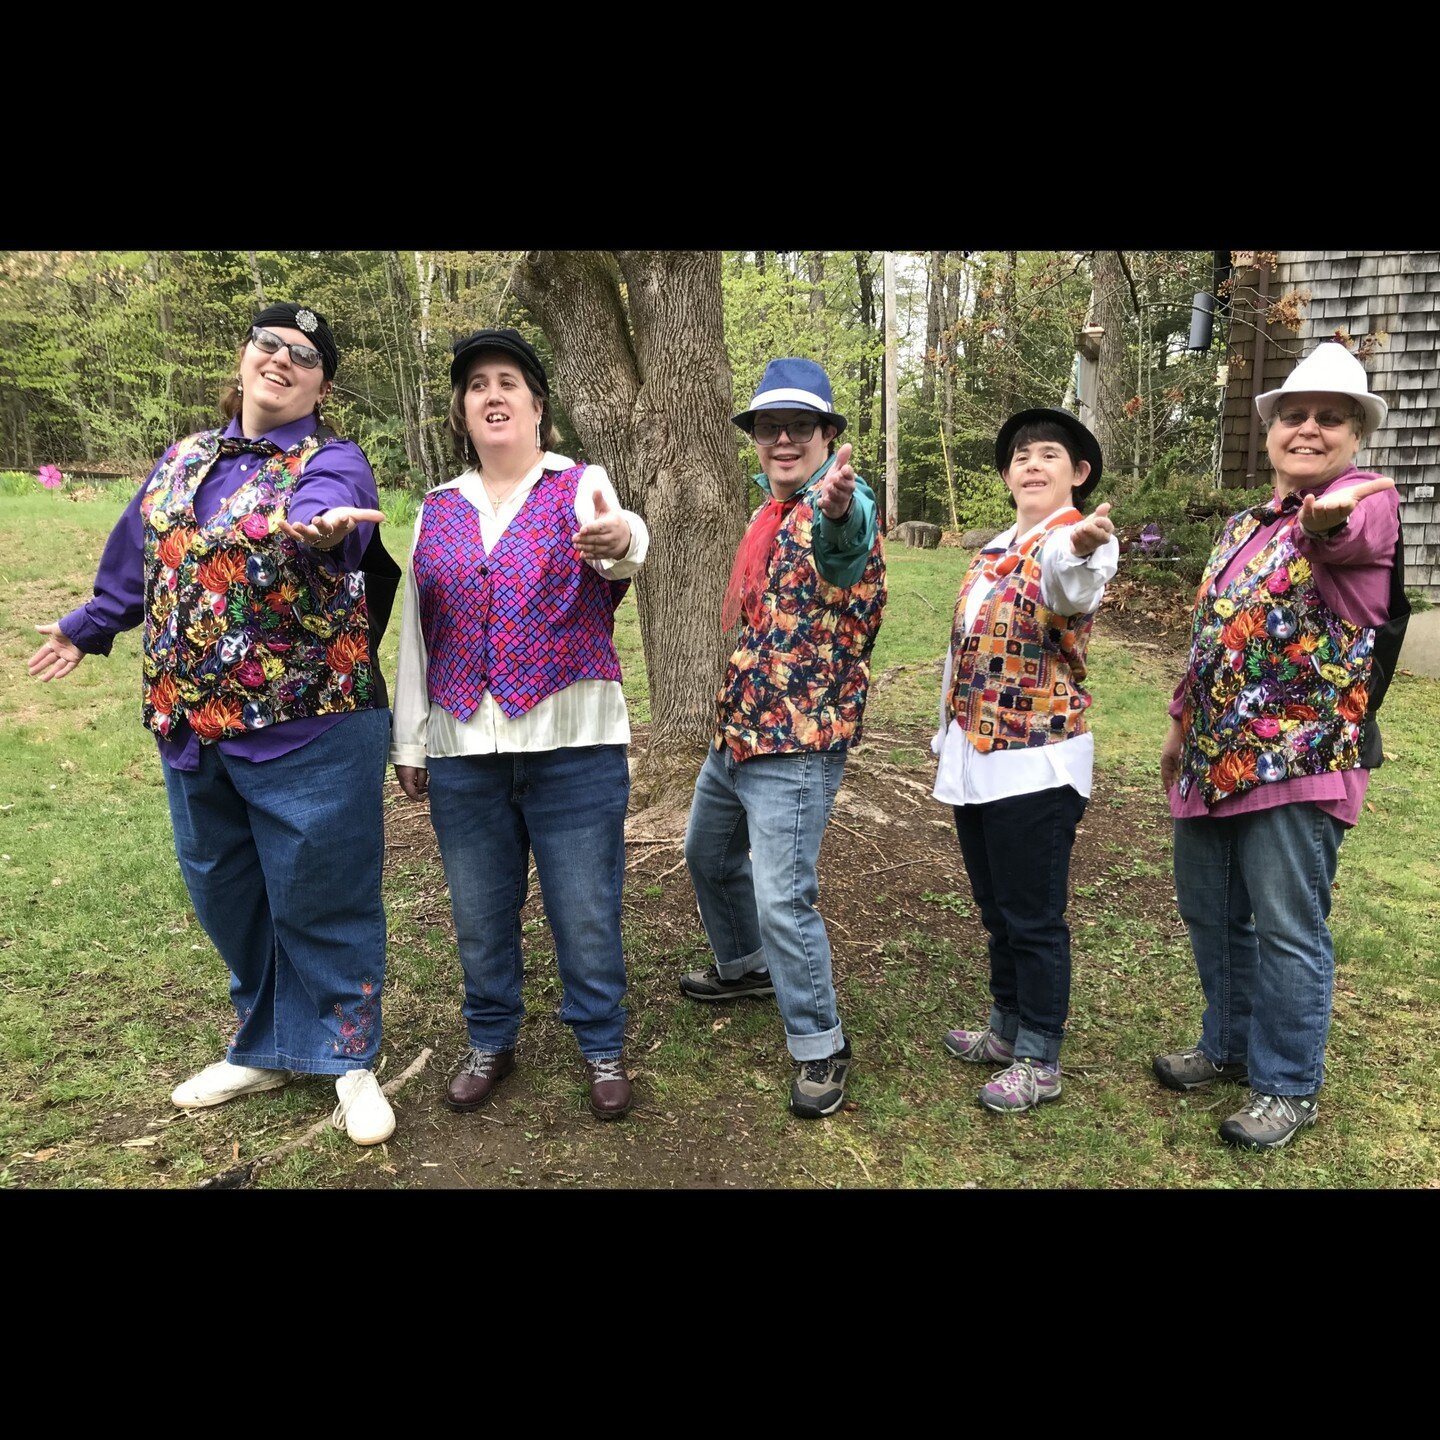 The Theatre Adventure Traveling Troupe had a great time in Shaftesbury, Vermont. They shared their love of theater and their skills as storytellers&mdash;- all while being &ldquo;cool as cucumbers&rdquo; performing in front of 230 elementary school c